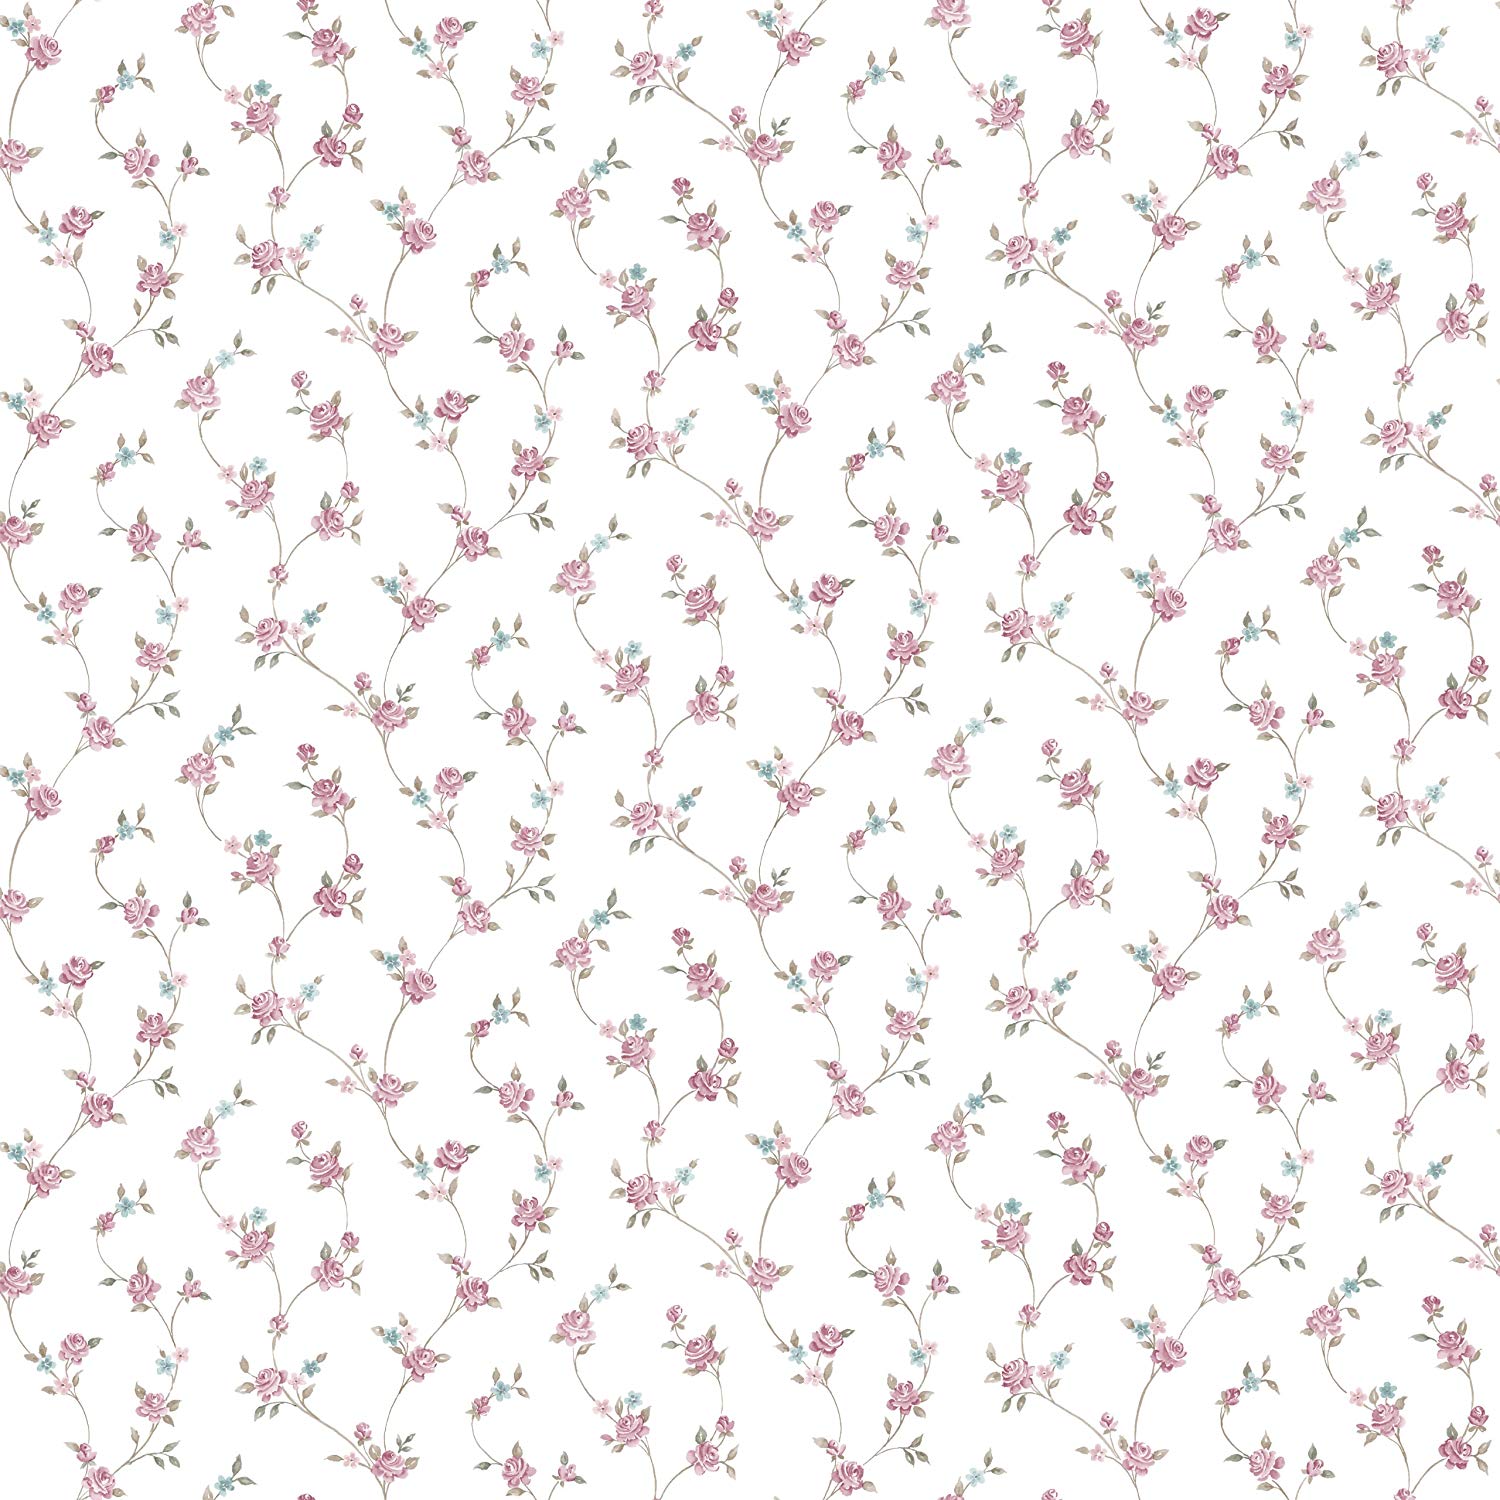 Galerie G23284 Floral Themes – Non-Woven Wallpaper Pink